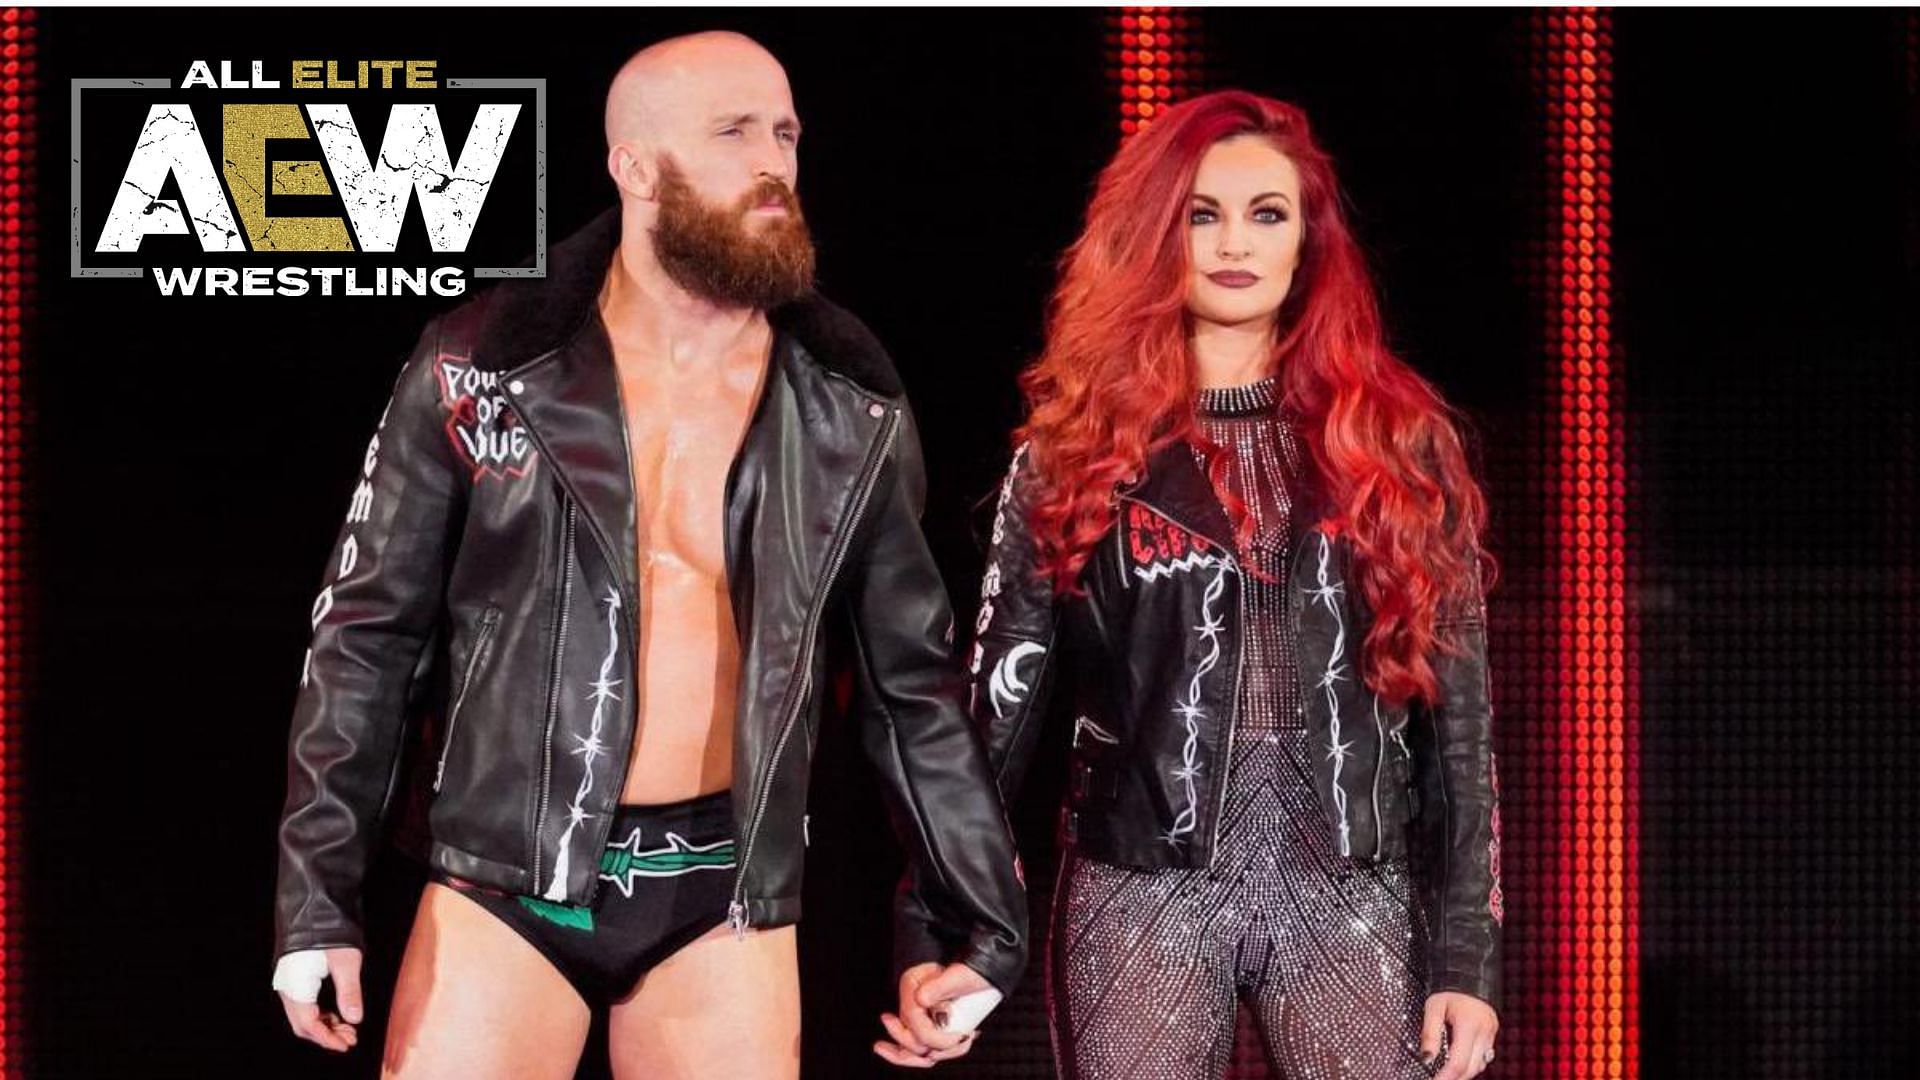 Mike Bennett and Maria Kanellis are currently signed to AEW